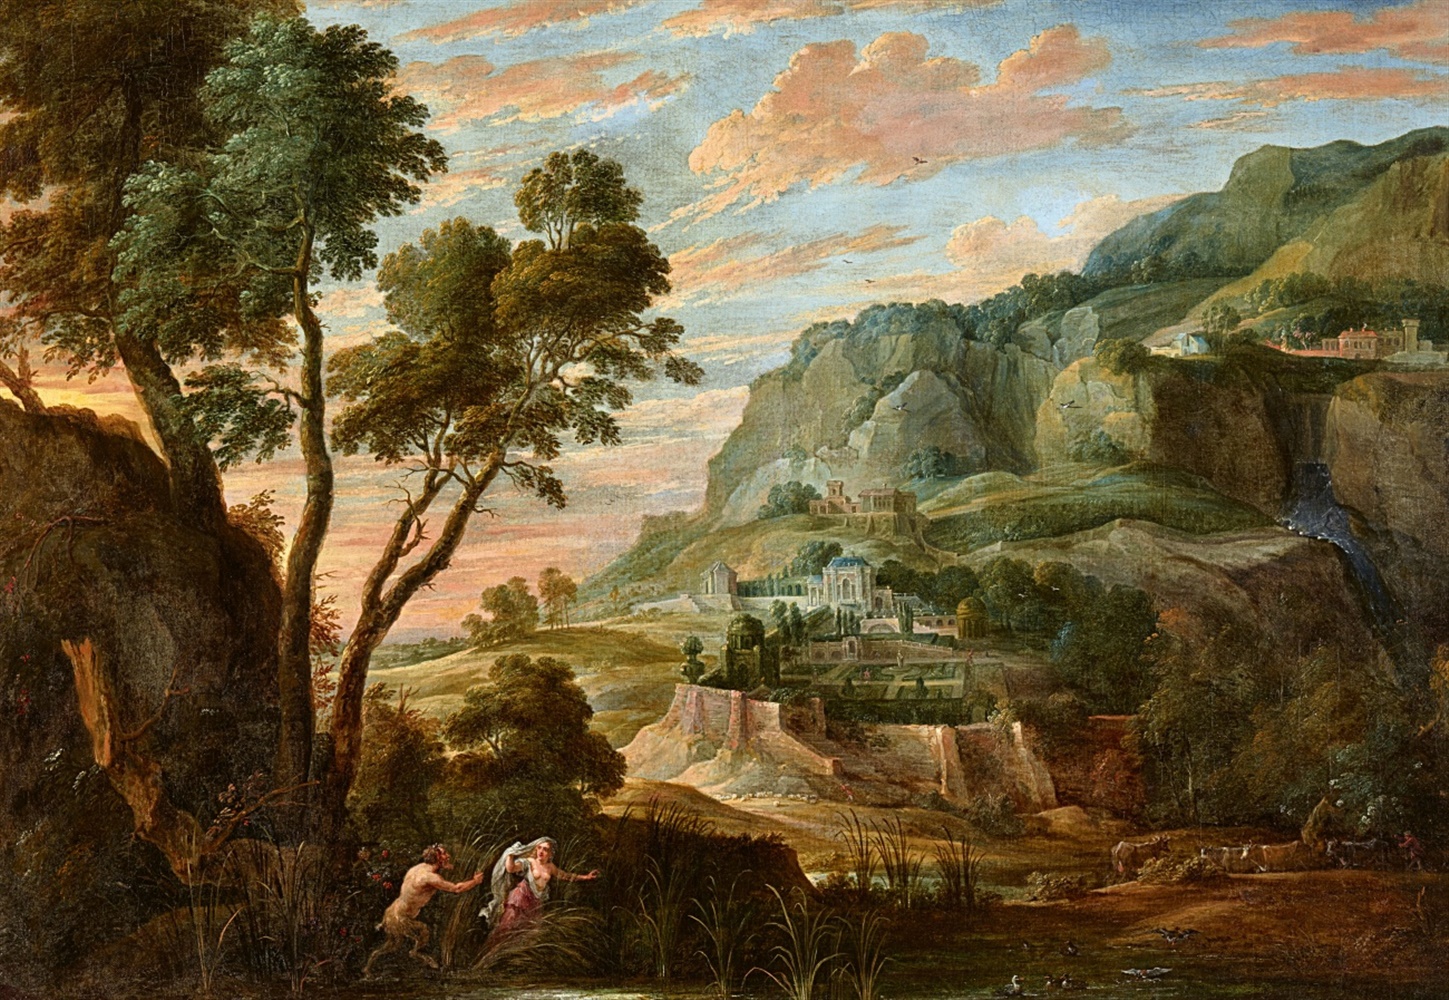 David Teniers the YoungerPanoramic Mountain Landscape with Pan and SyrinxOil on canvas (relined).